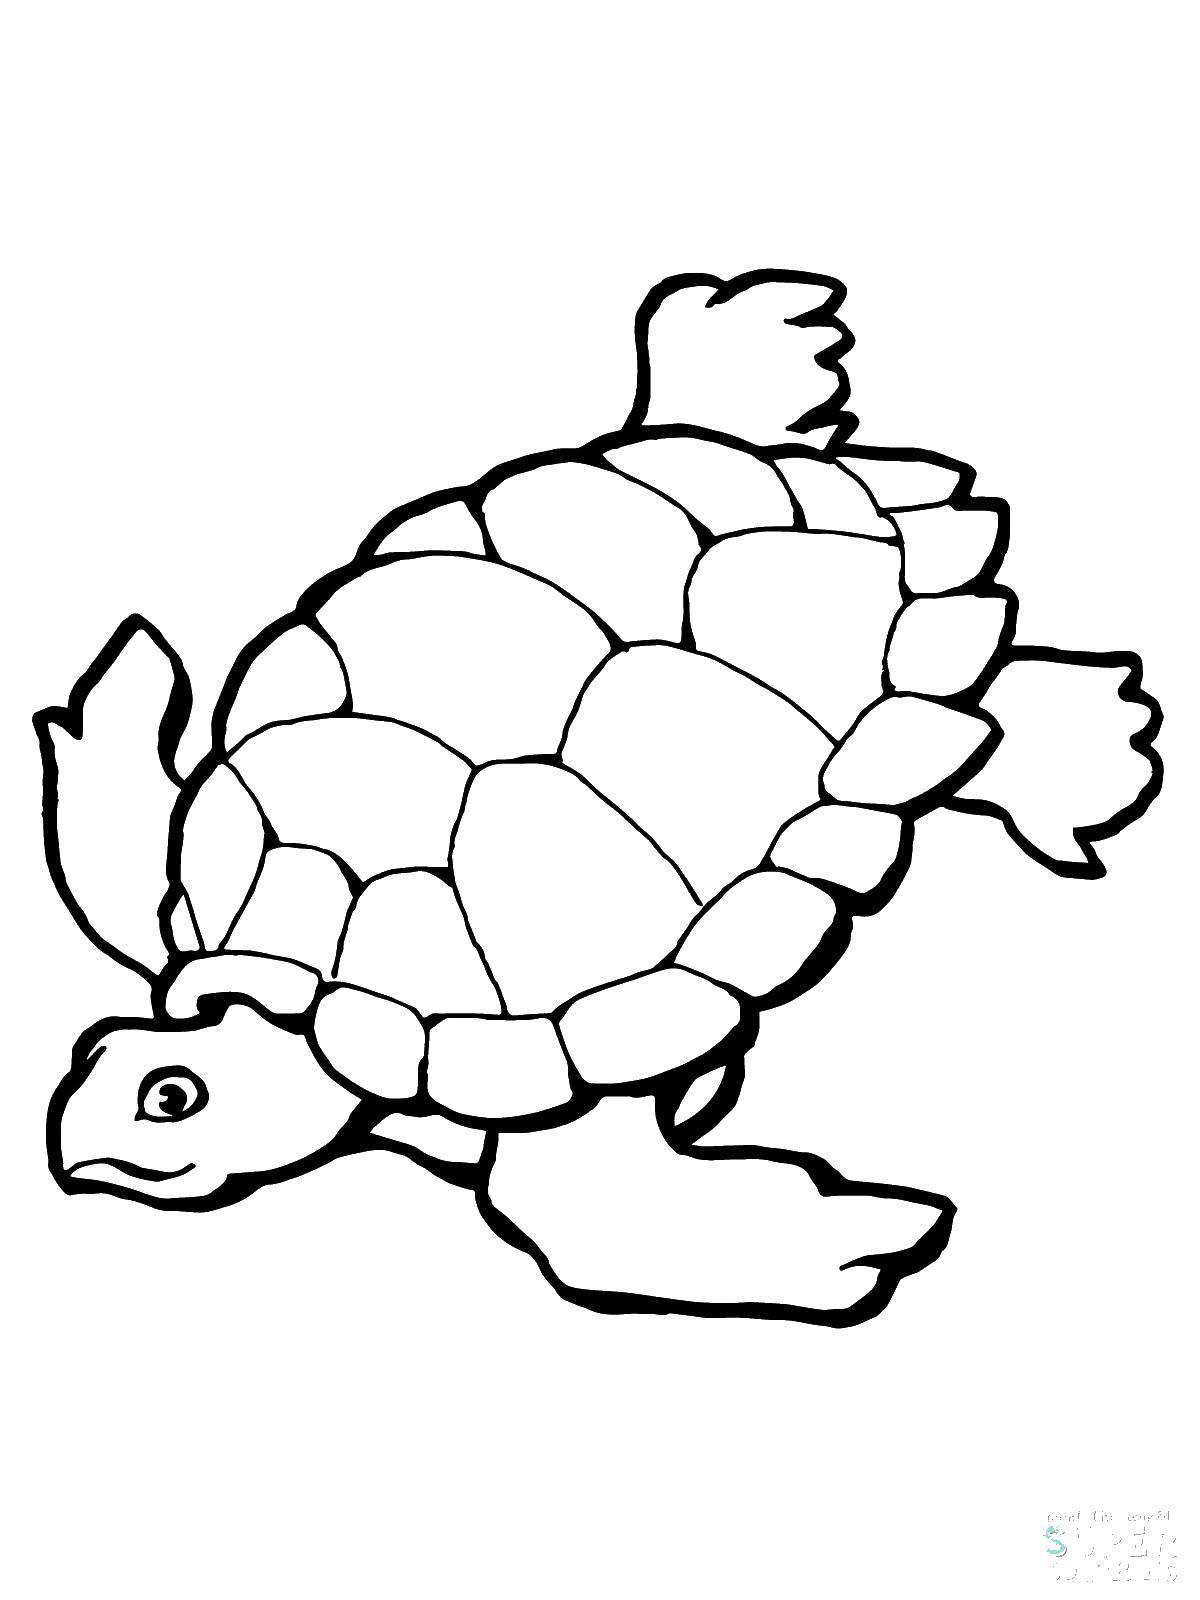 Coloring Sea turtle. Category marine. Tags:  Underwater world, turtle.